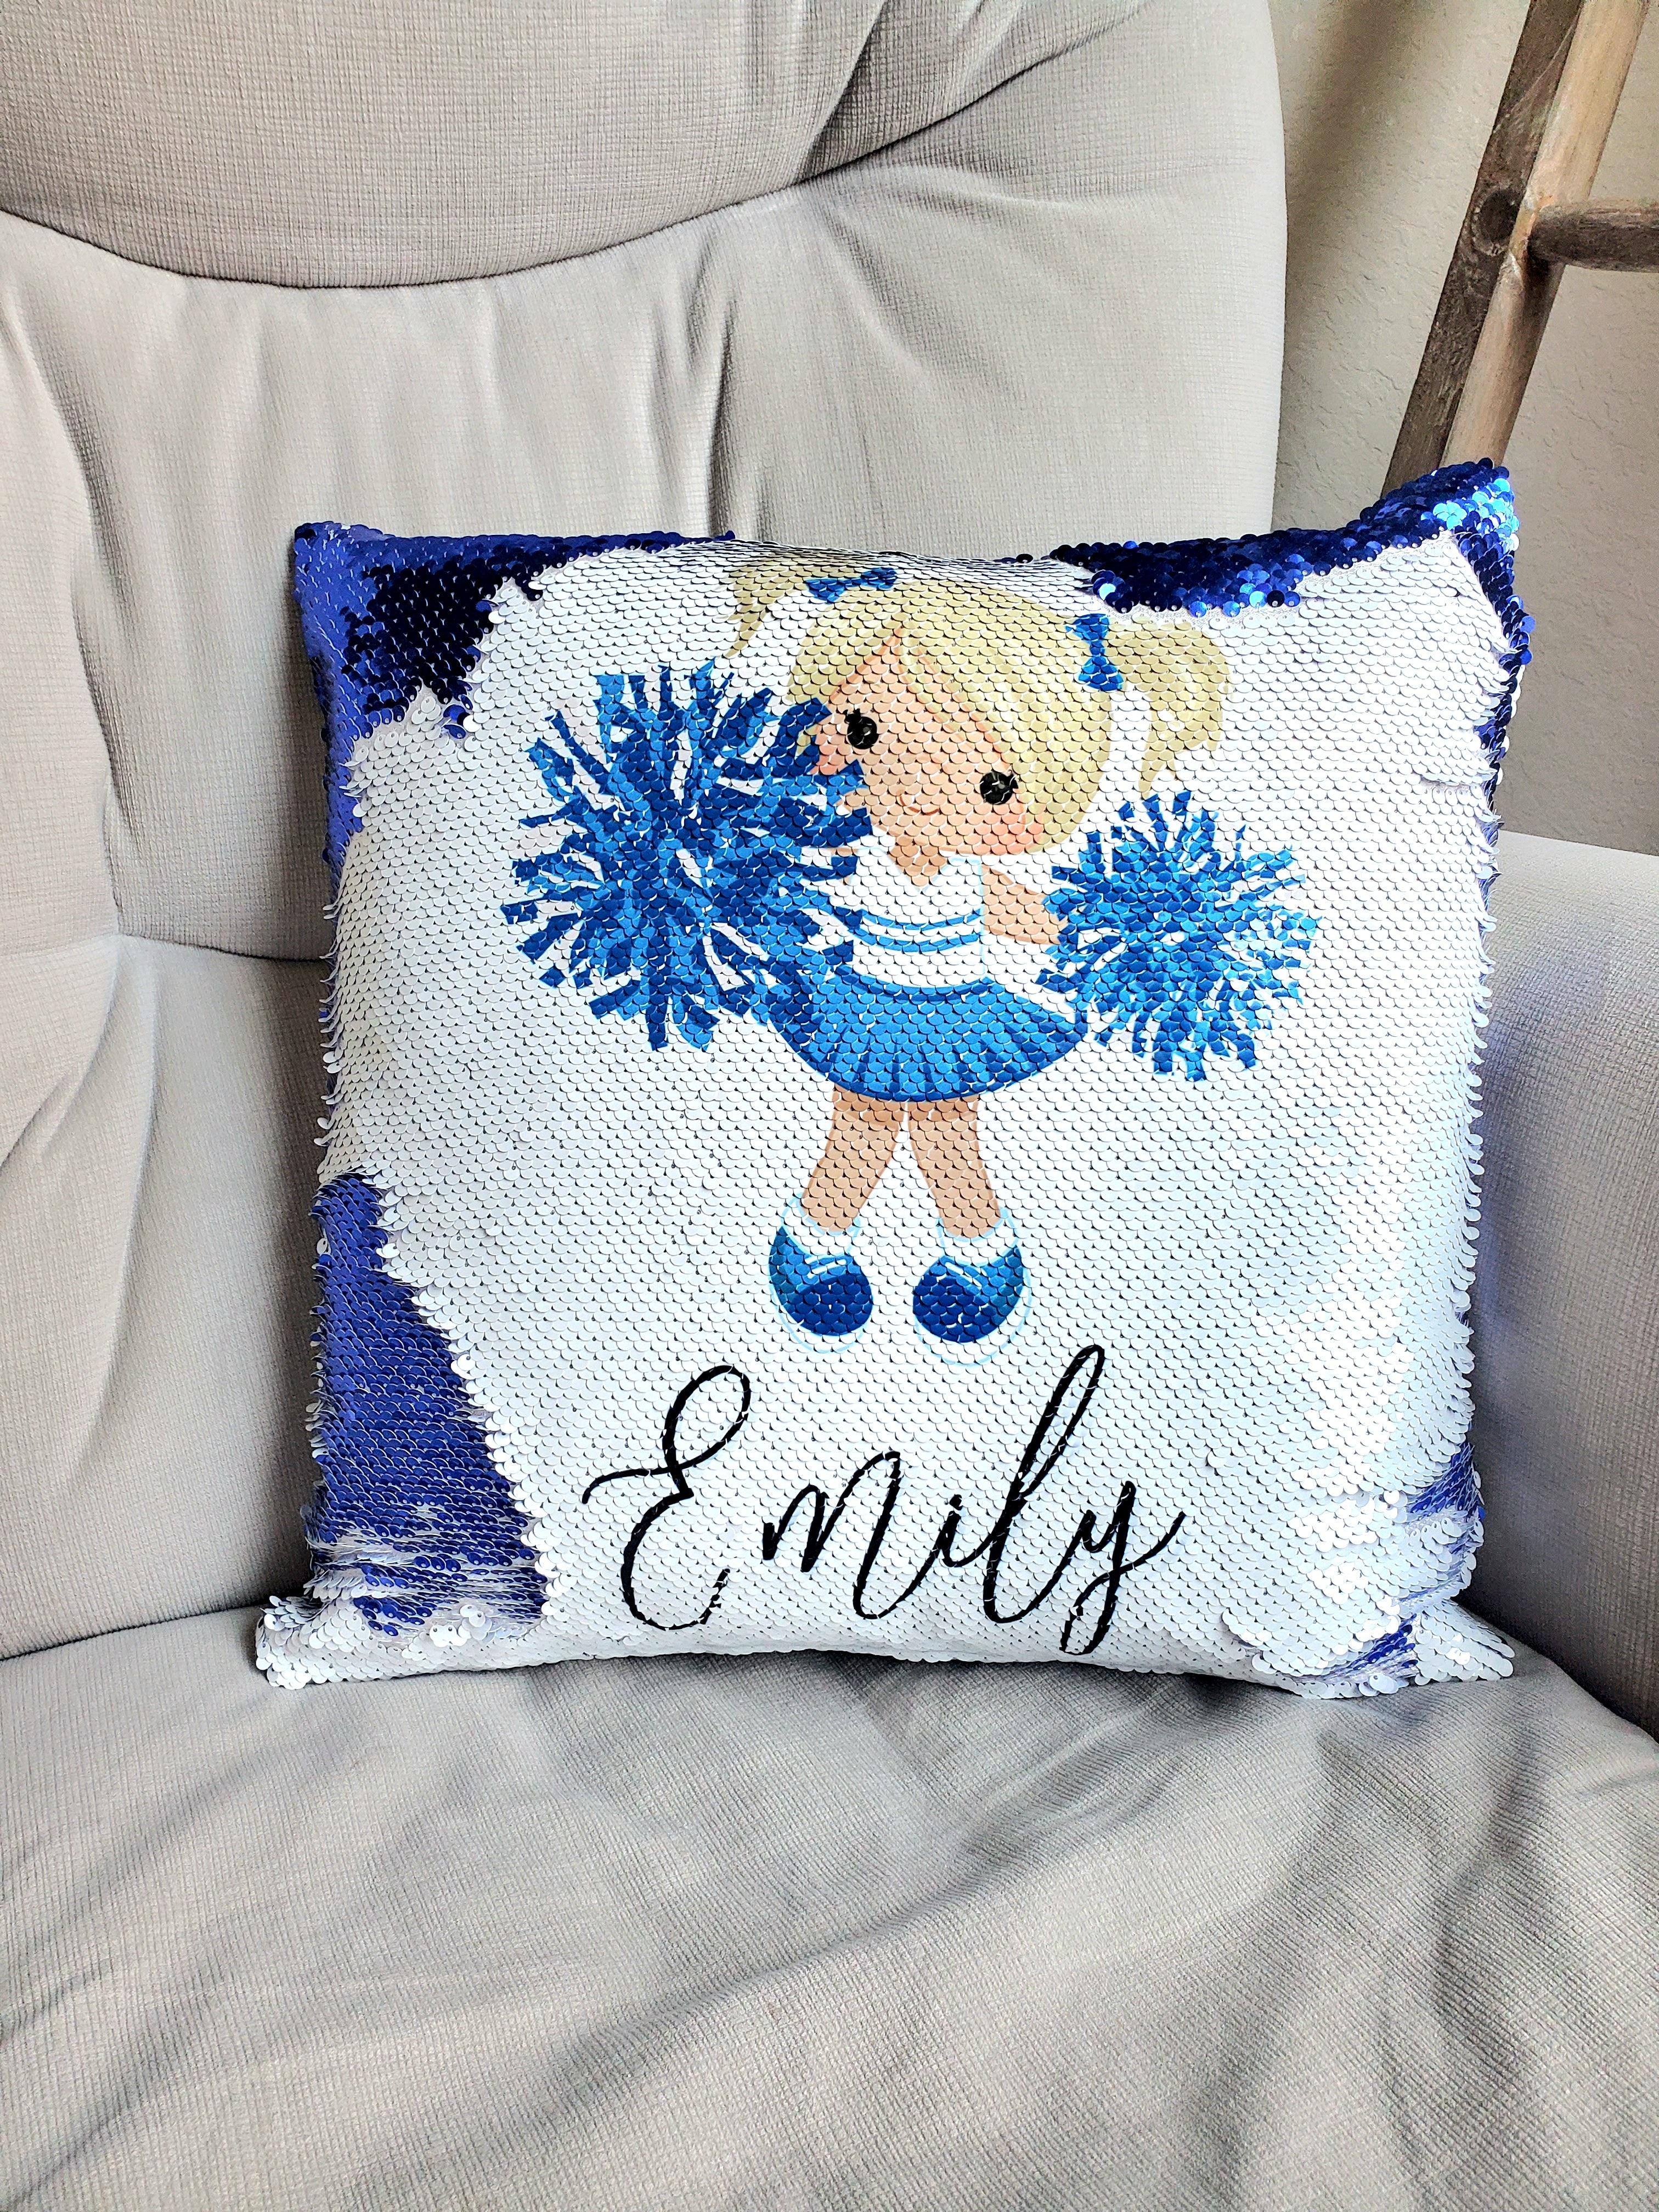 Personalized Cheer Gifts, Cheerleader Team Gift Ideas, Cheer Birthday Party Decor, Cute Gift for Toddler Girls 2, 3, 4, 5, 6, 7 year old, Birthday Gift for Girls, Cheerleader pillow case personalized Sequin Throw Pillowcase Custom Reversible Pillow Decorative Cushion Pillow Cover, Cheer lover gift | Gift for child with Sensory Needs and or Autism, Birthday Theme Party Supplies